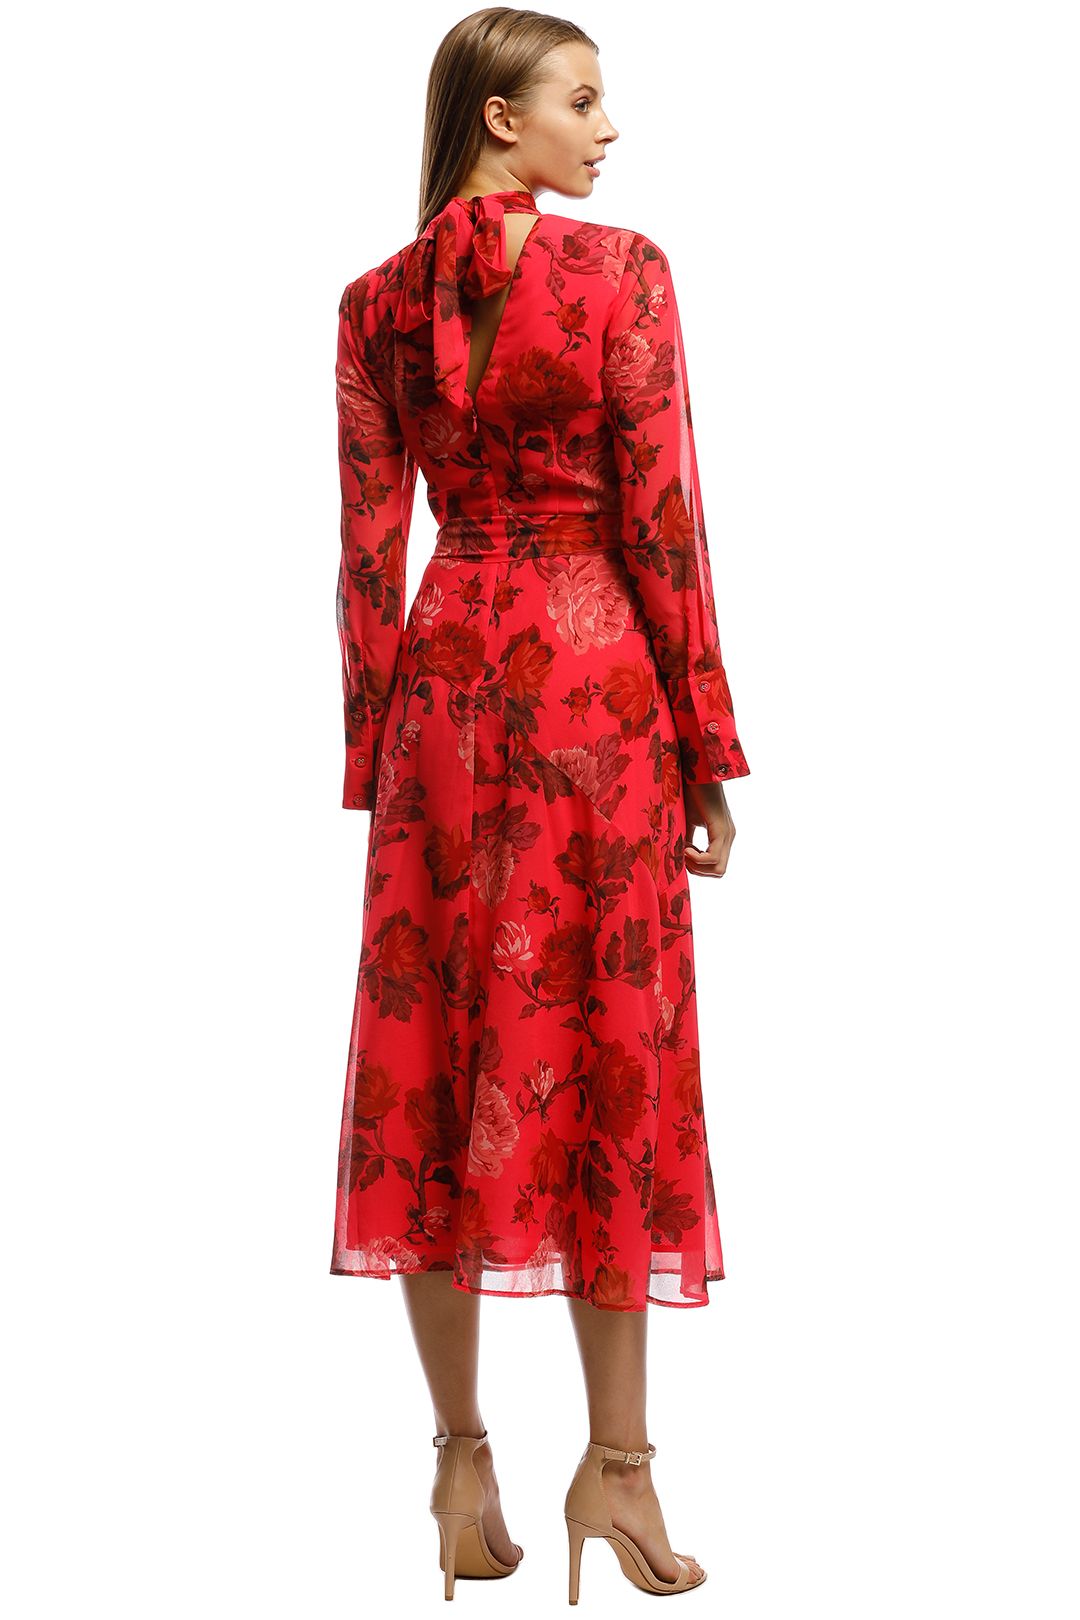 CMEO Collective - Variation LS Midi Dress - Red - Back